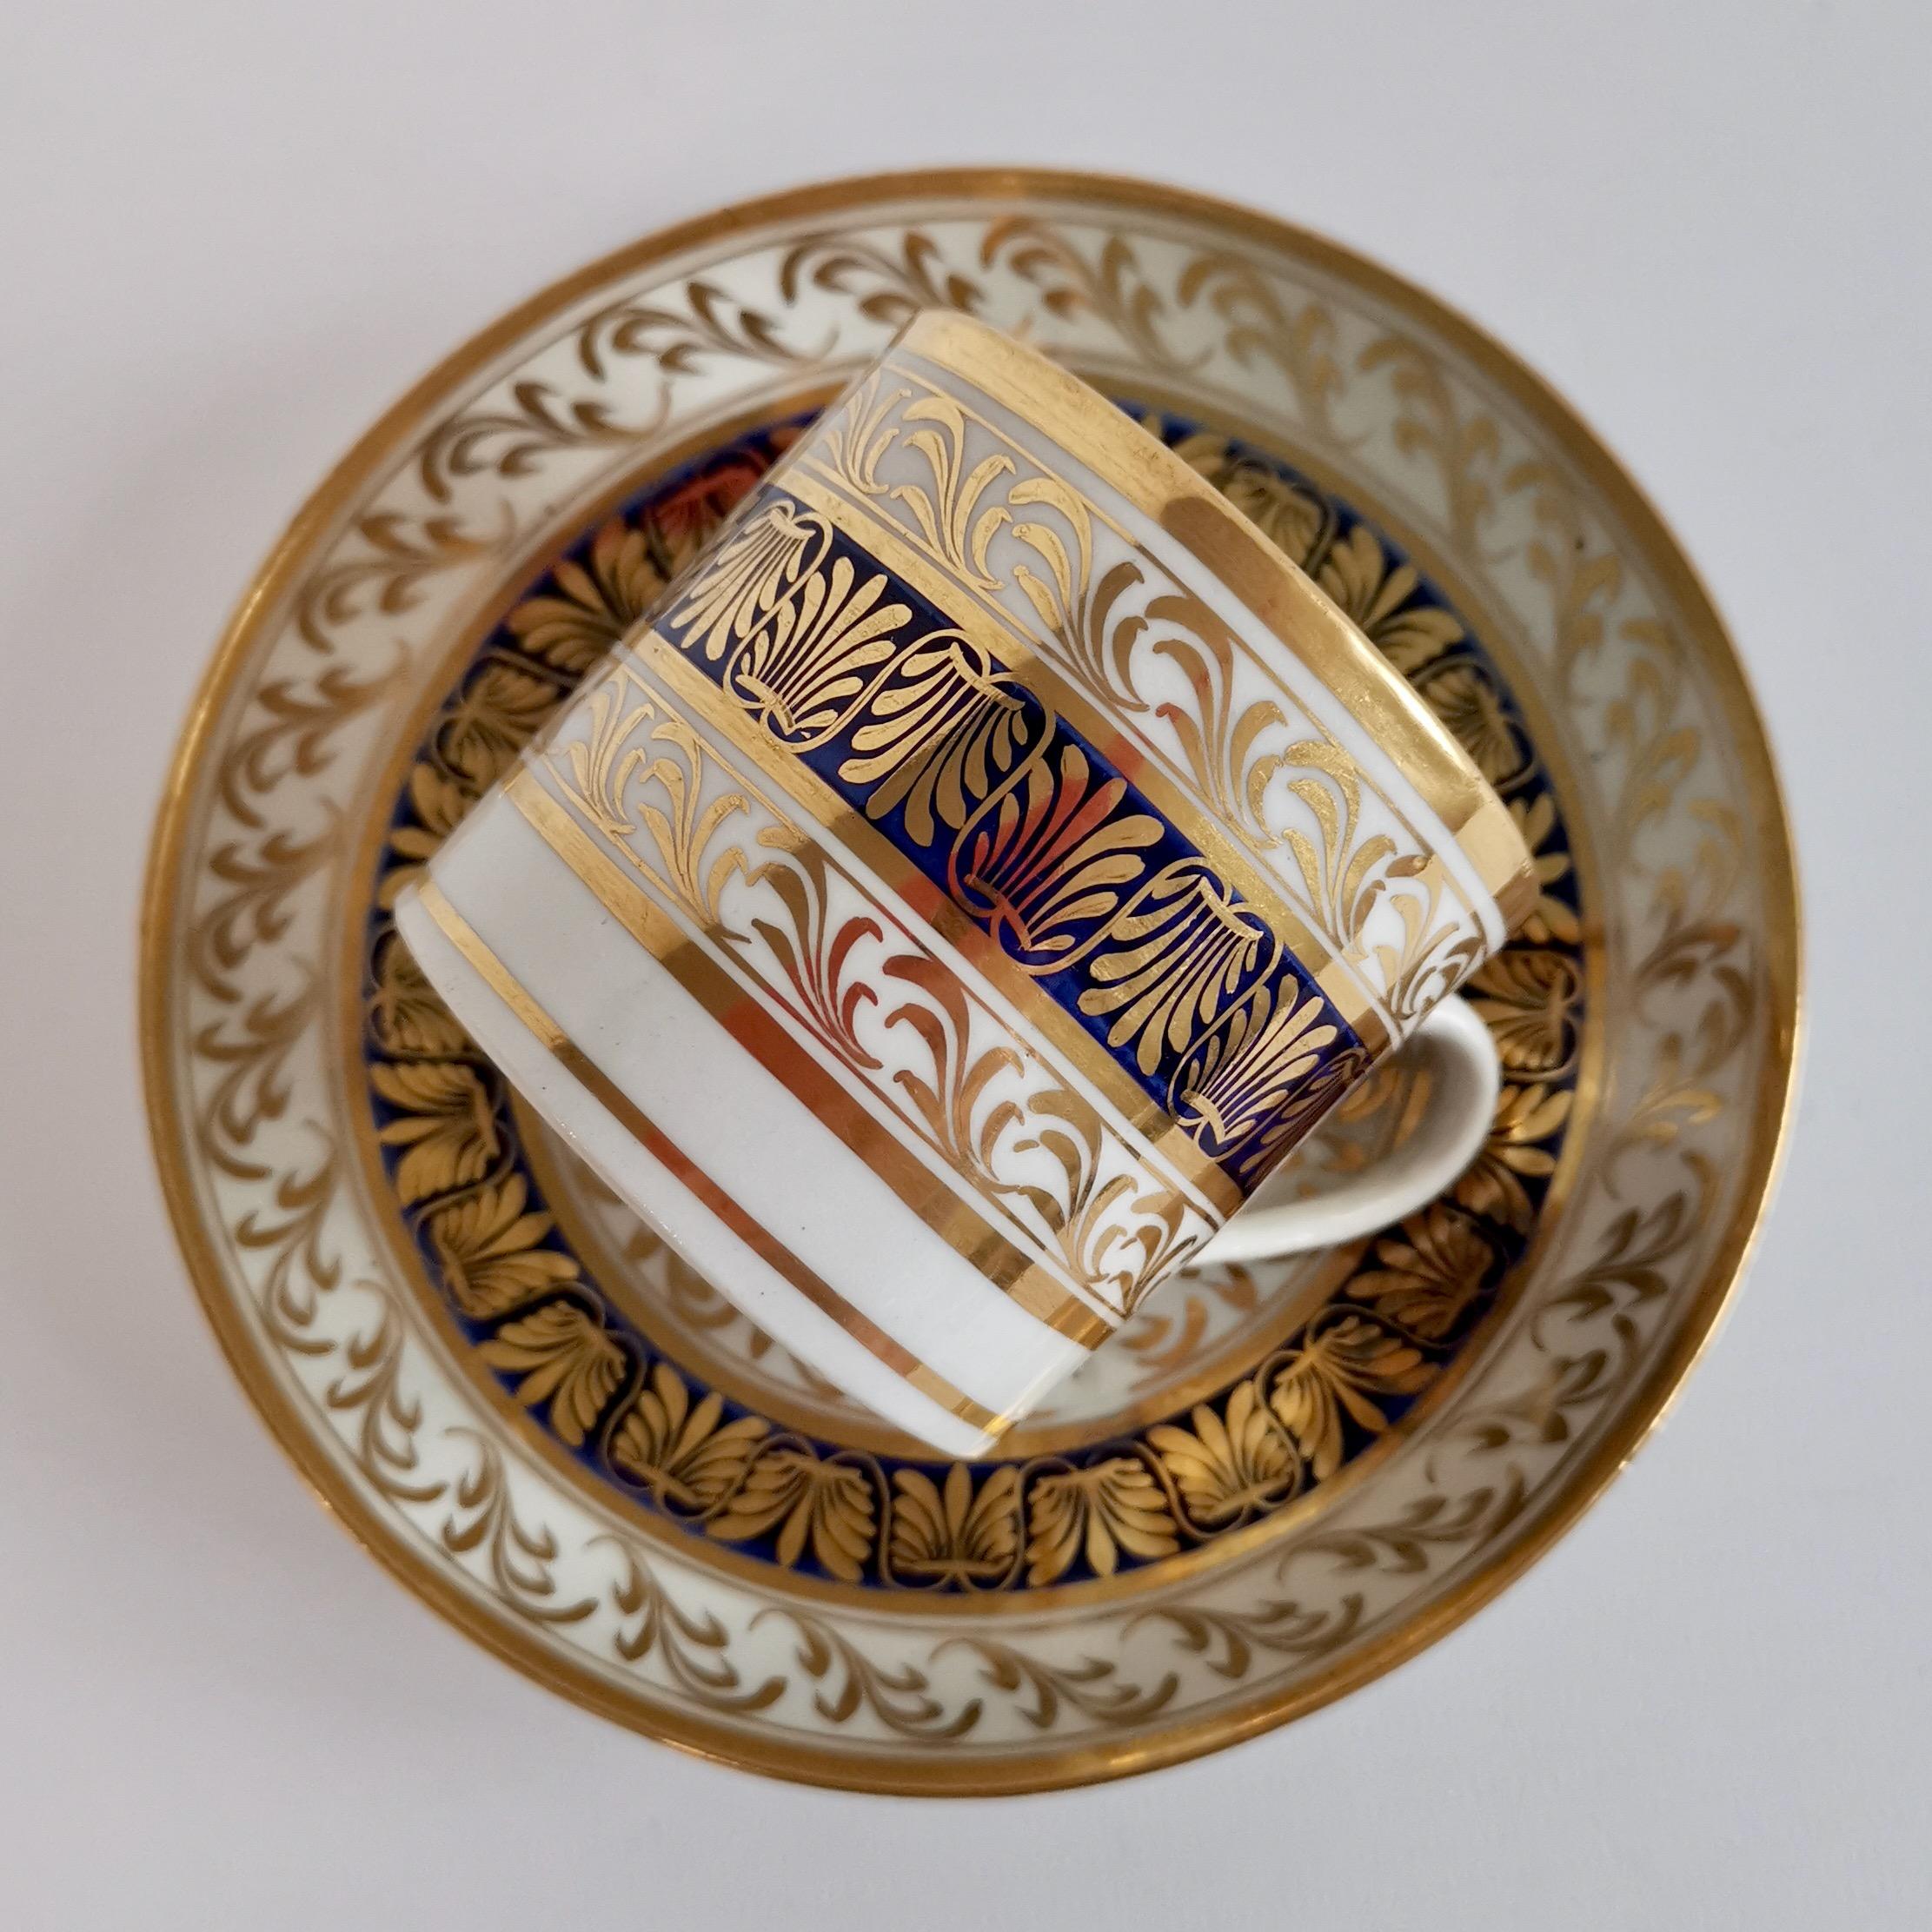 English New Hall Porcelain Coffee Can and Saucer, Regency Pattern Blue and Gilt, ca 1810